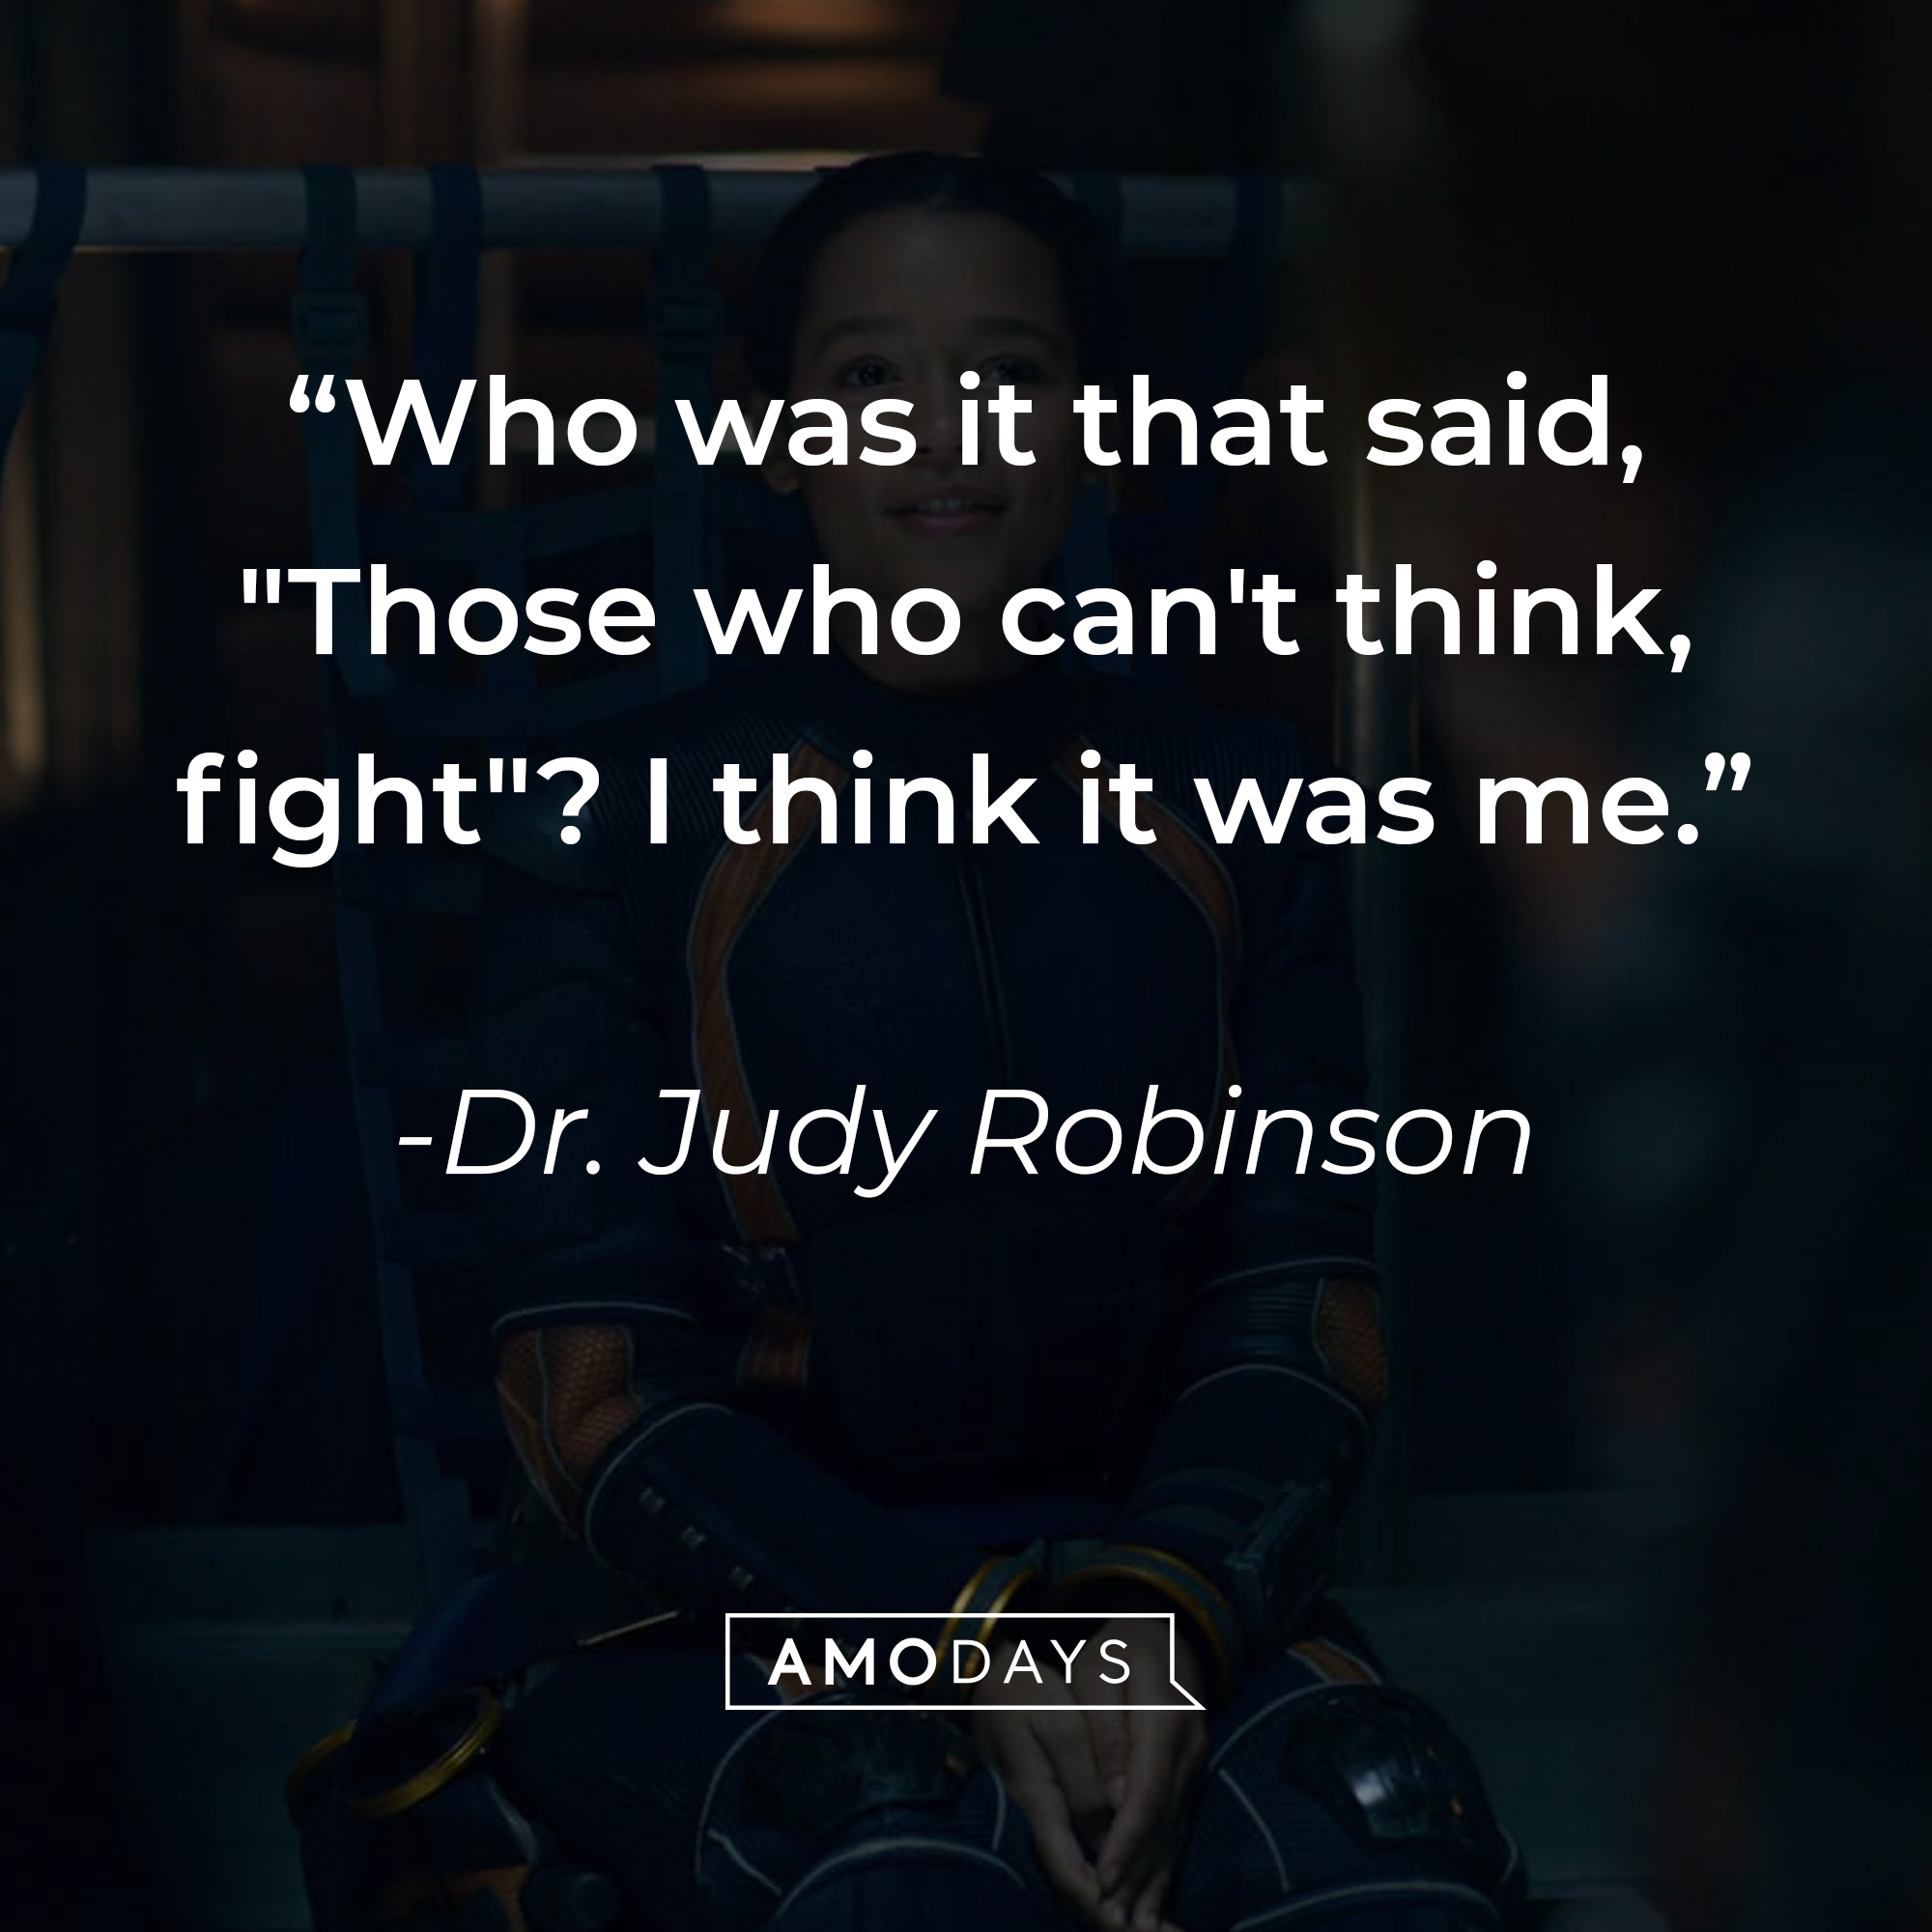 Dr. Judy Robinson’s quote: "Who was it that said, "Those who can't think, fight"? I think it was me." | Image: Facebook.com/lostinspacenetflix